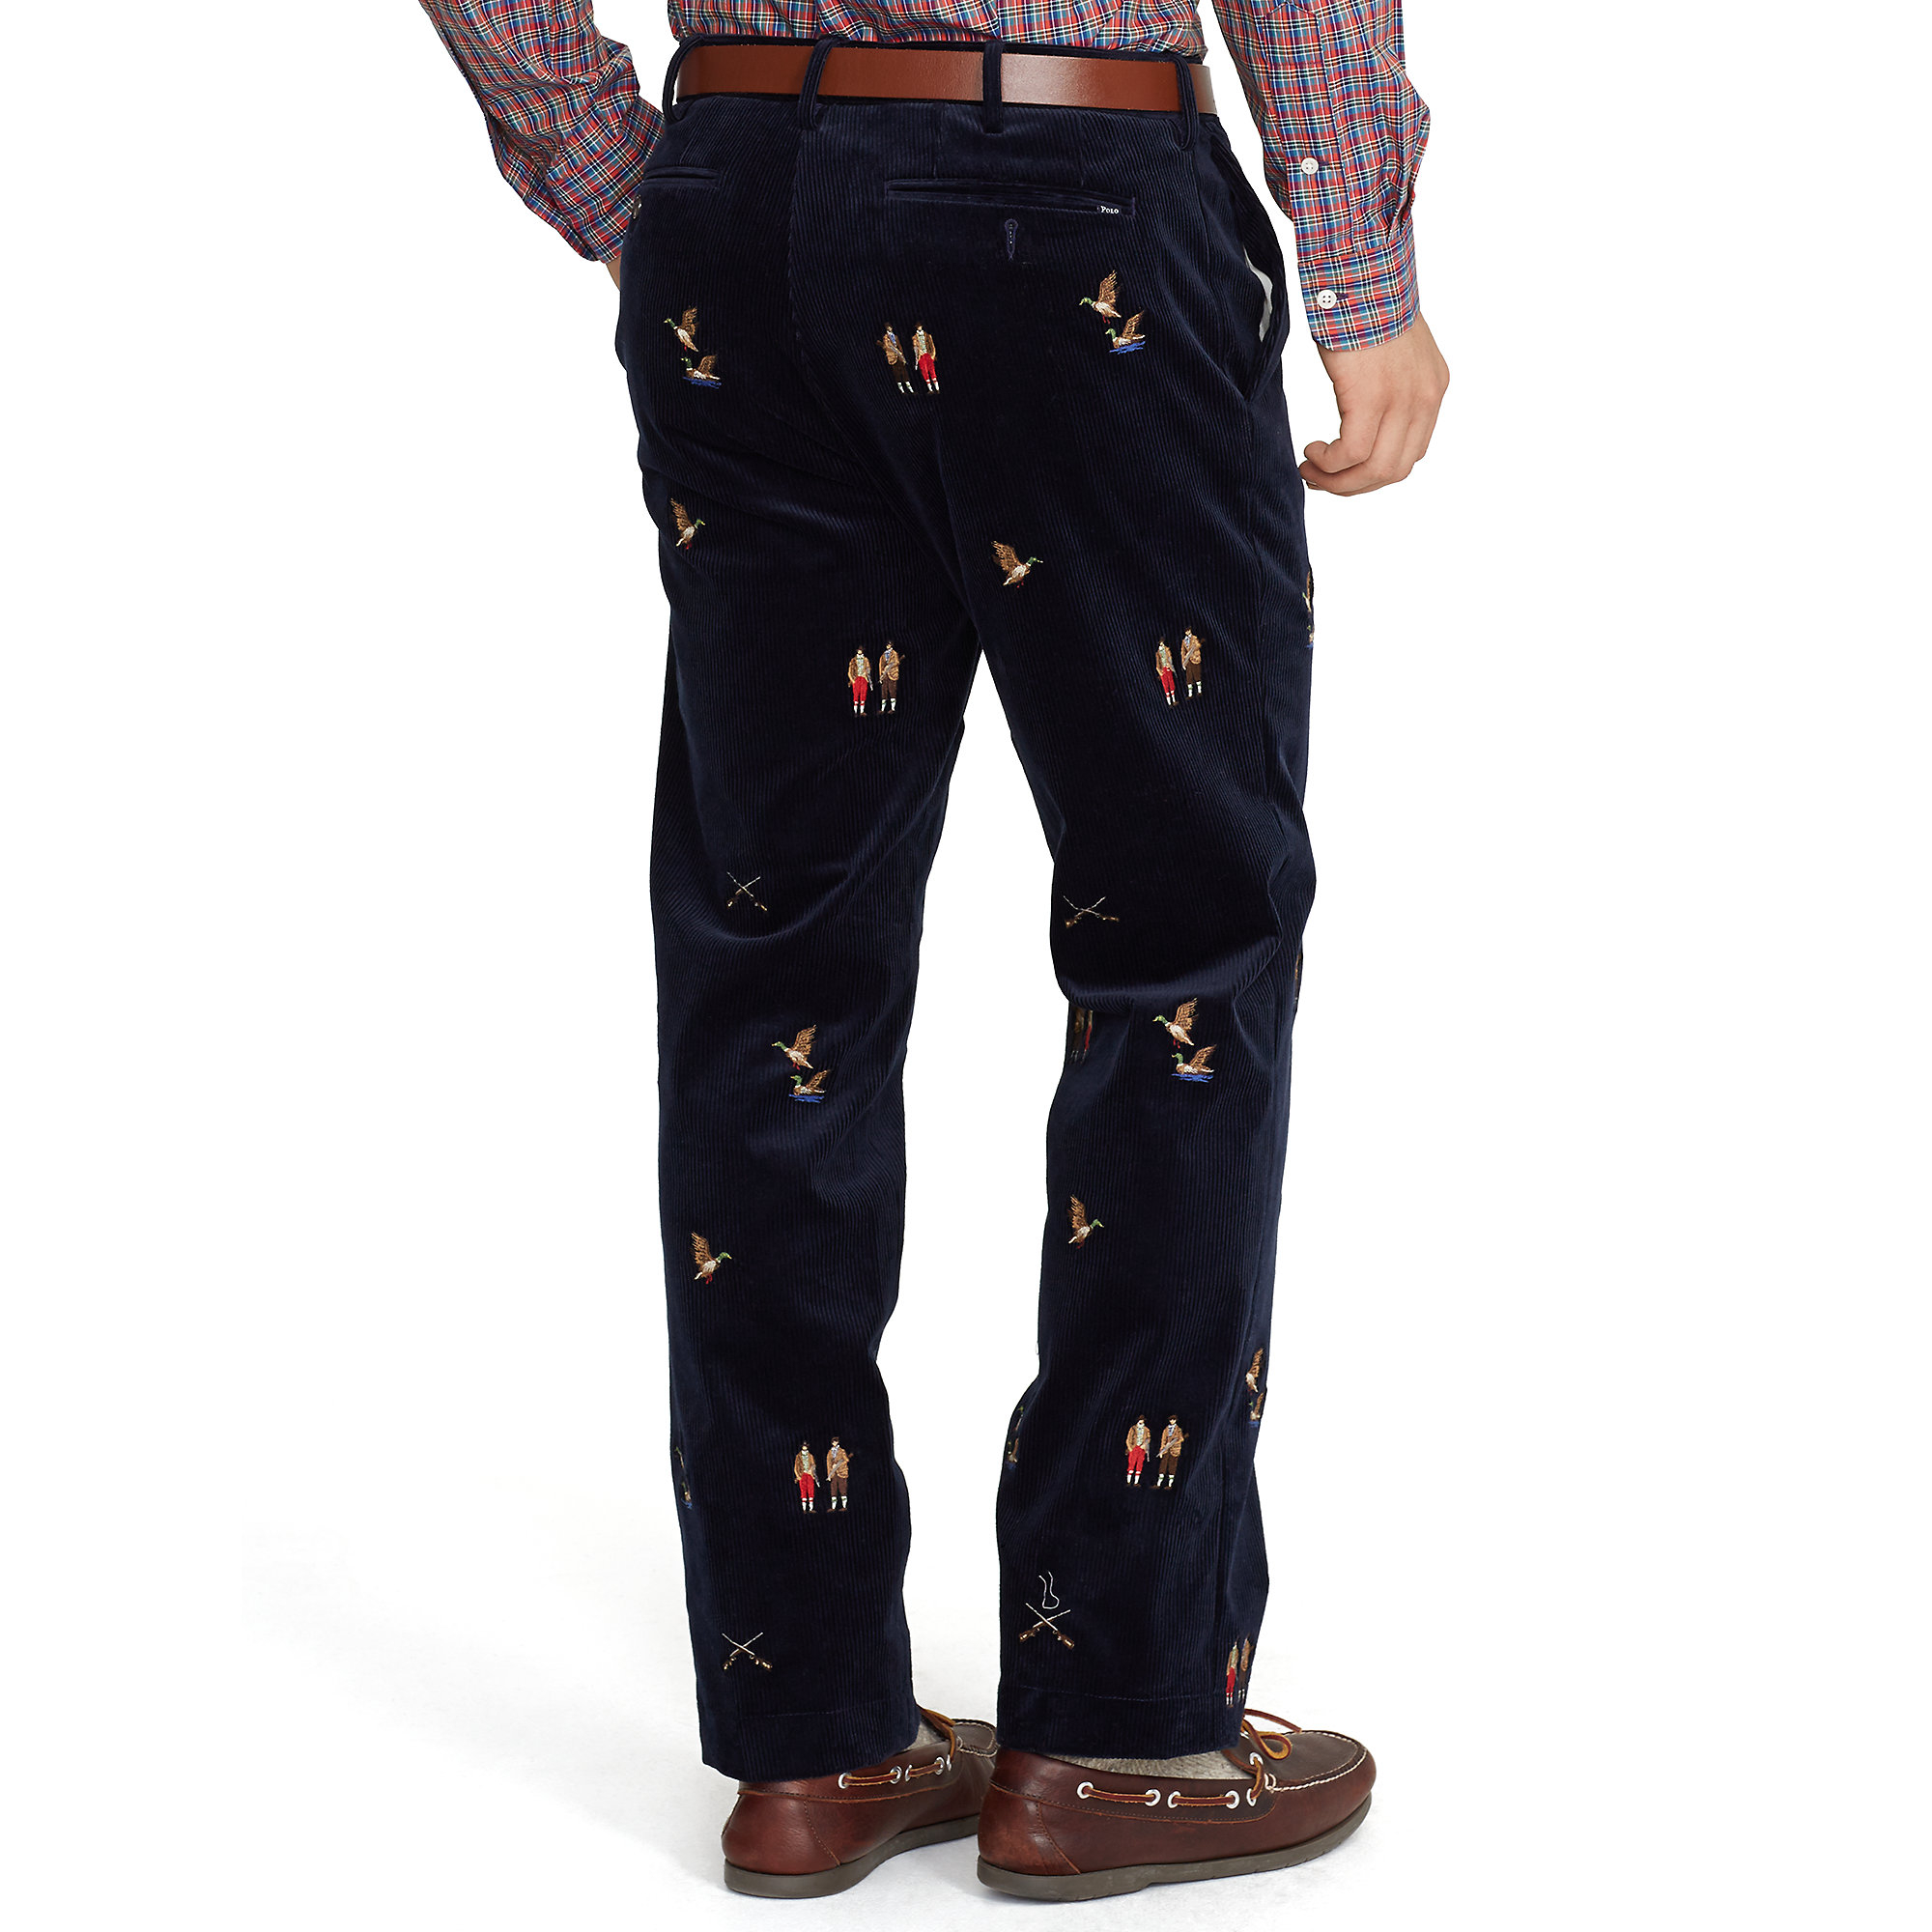 Lyst - Polo Ralph Lauren Classic-Fit Embroidered Pant in Blue for Men